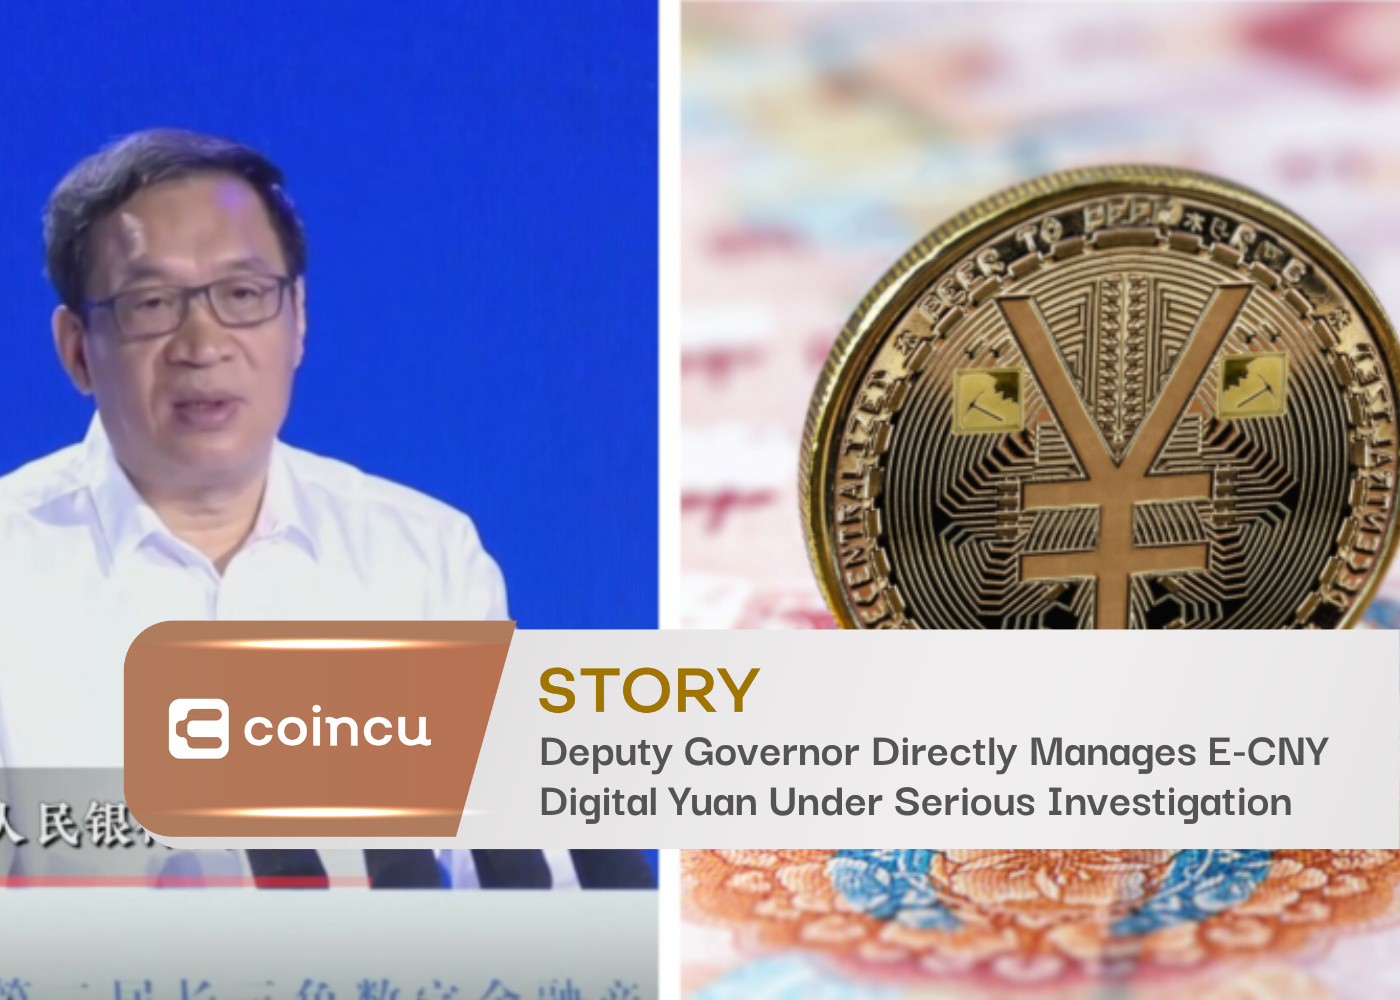 Deputy Governor Directly Manages E-CNY Digital Yuan Under Serious Investigation